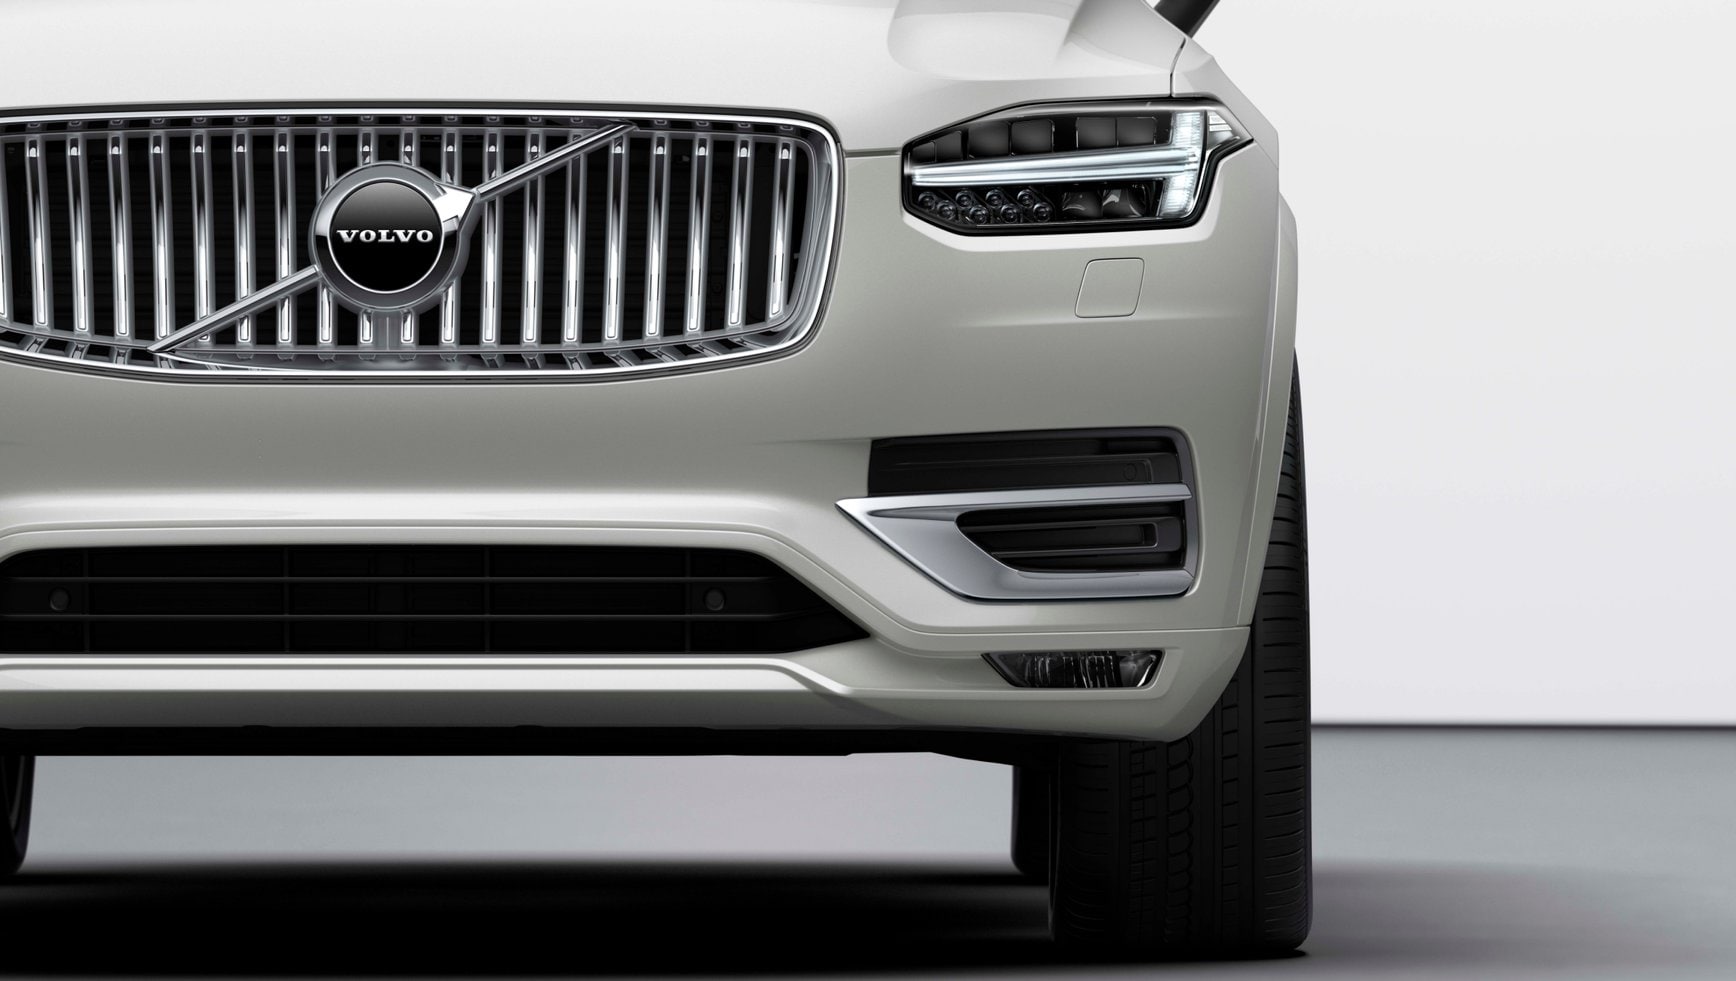 The 3D Volvo Iron Mark emblem on the front grille.